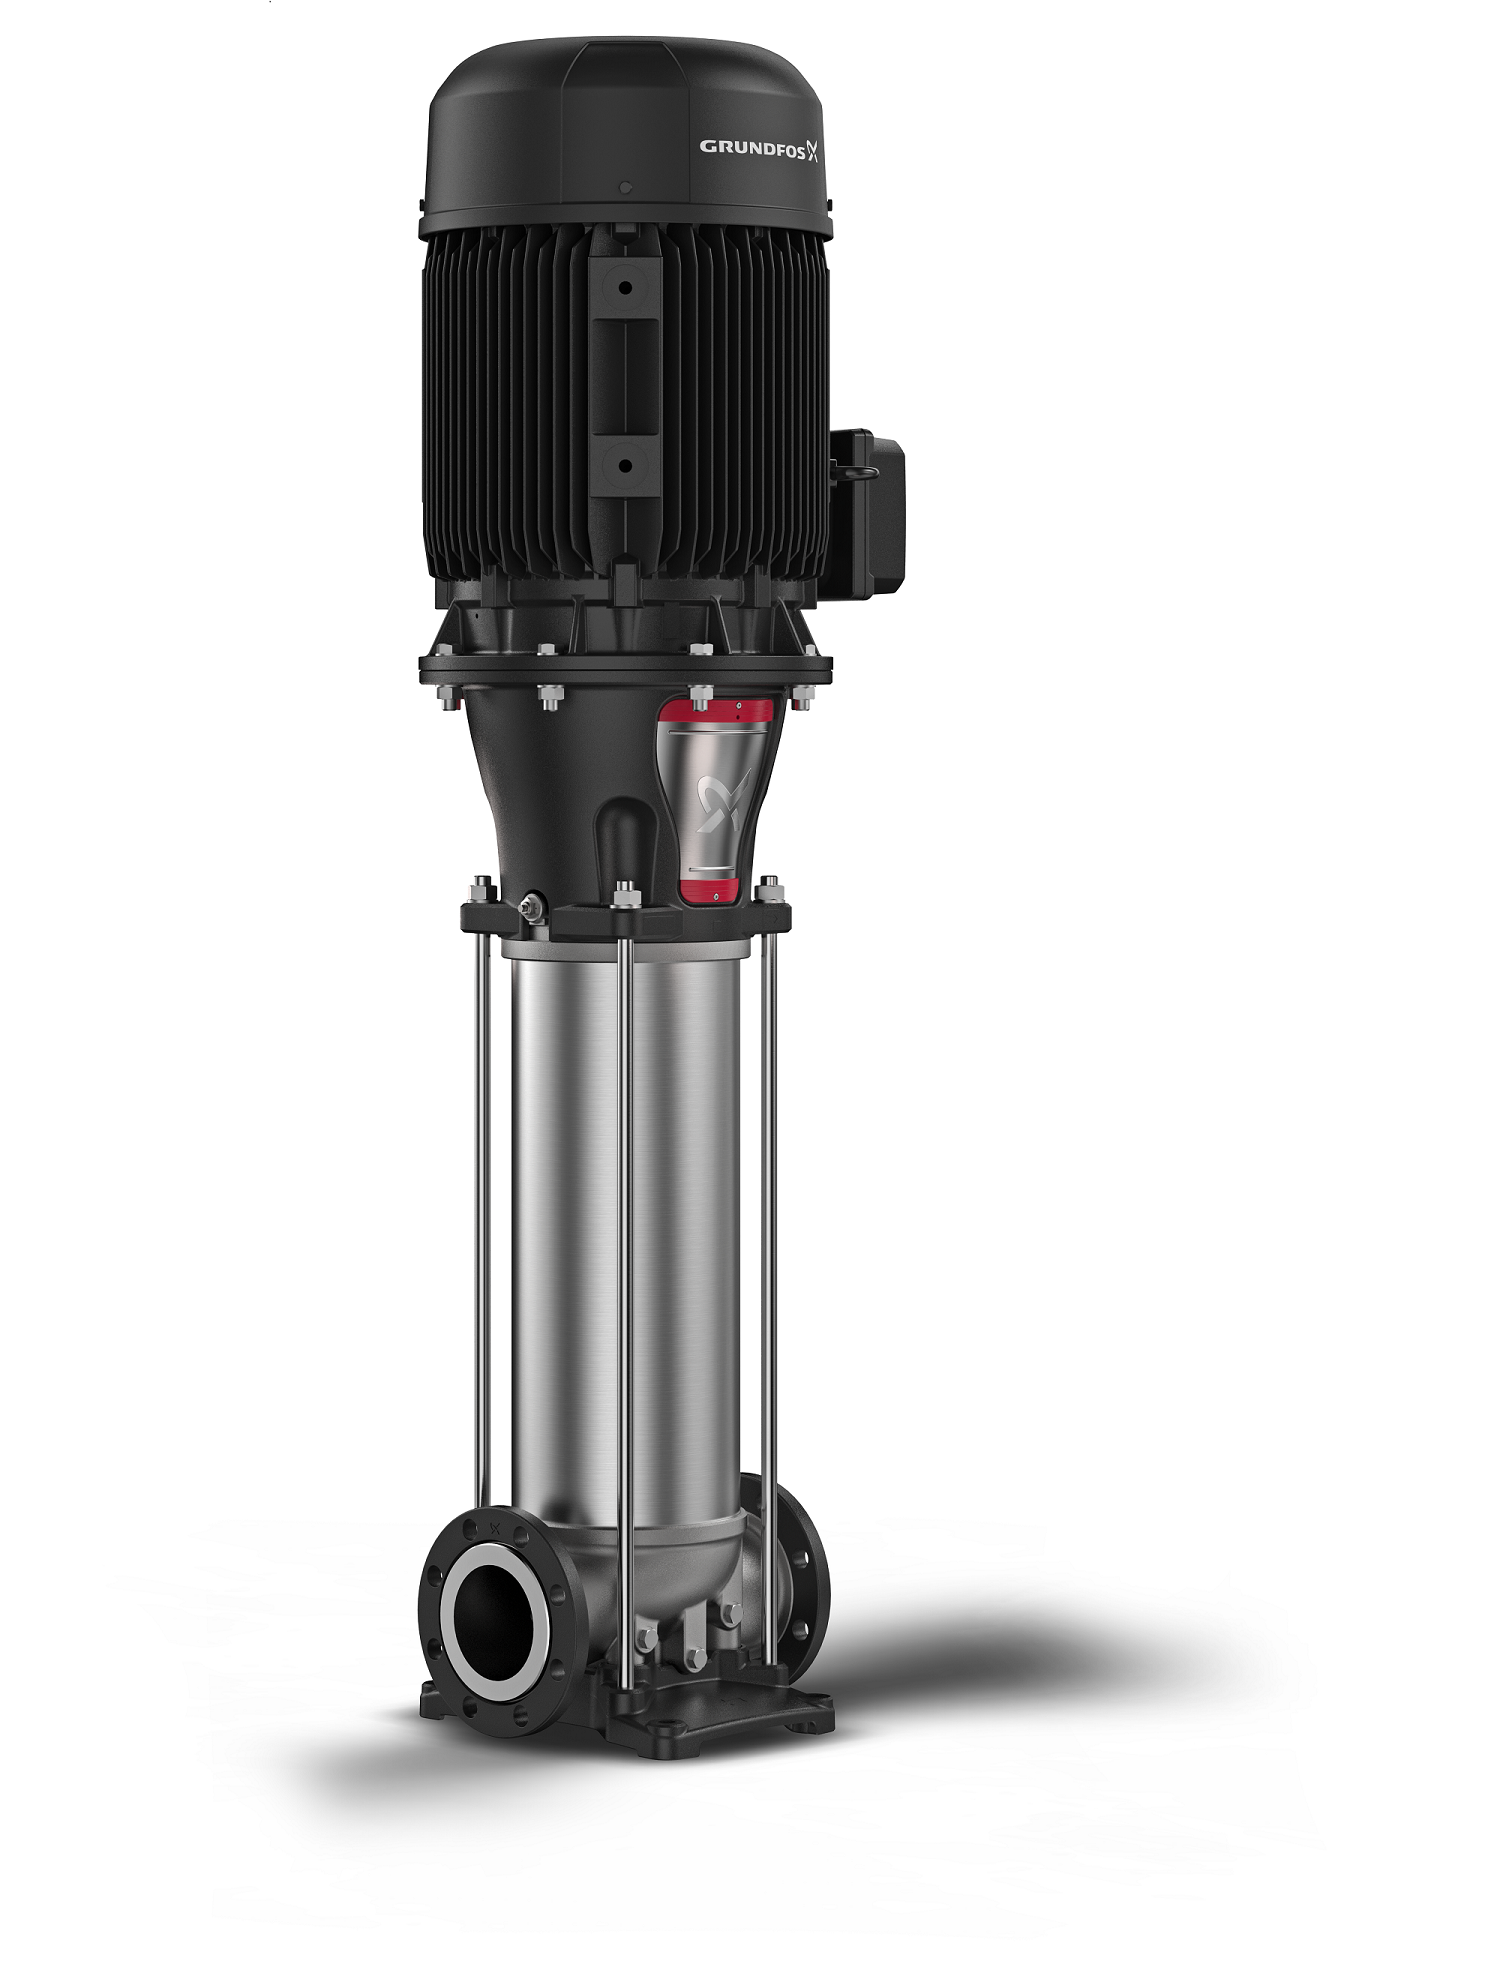 Once the new generation is fully released, it will include three extra-large flow sizes of up to 580 psi pump pressure.